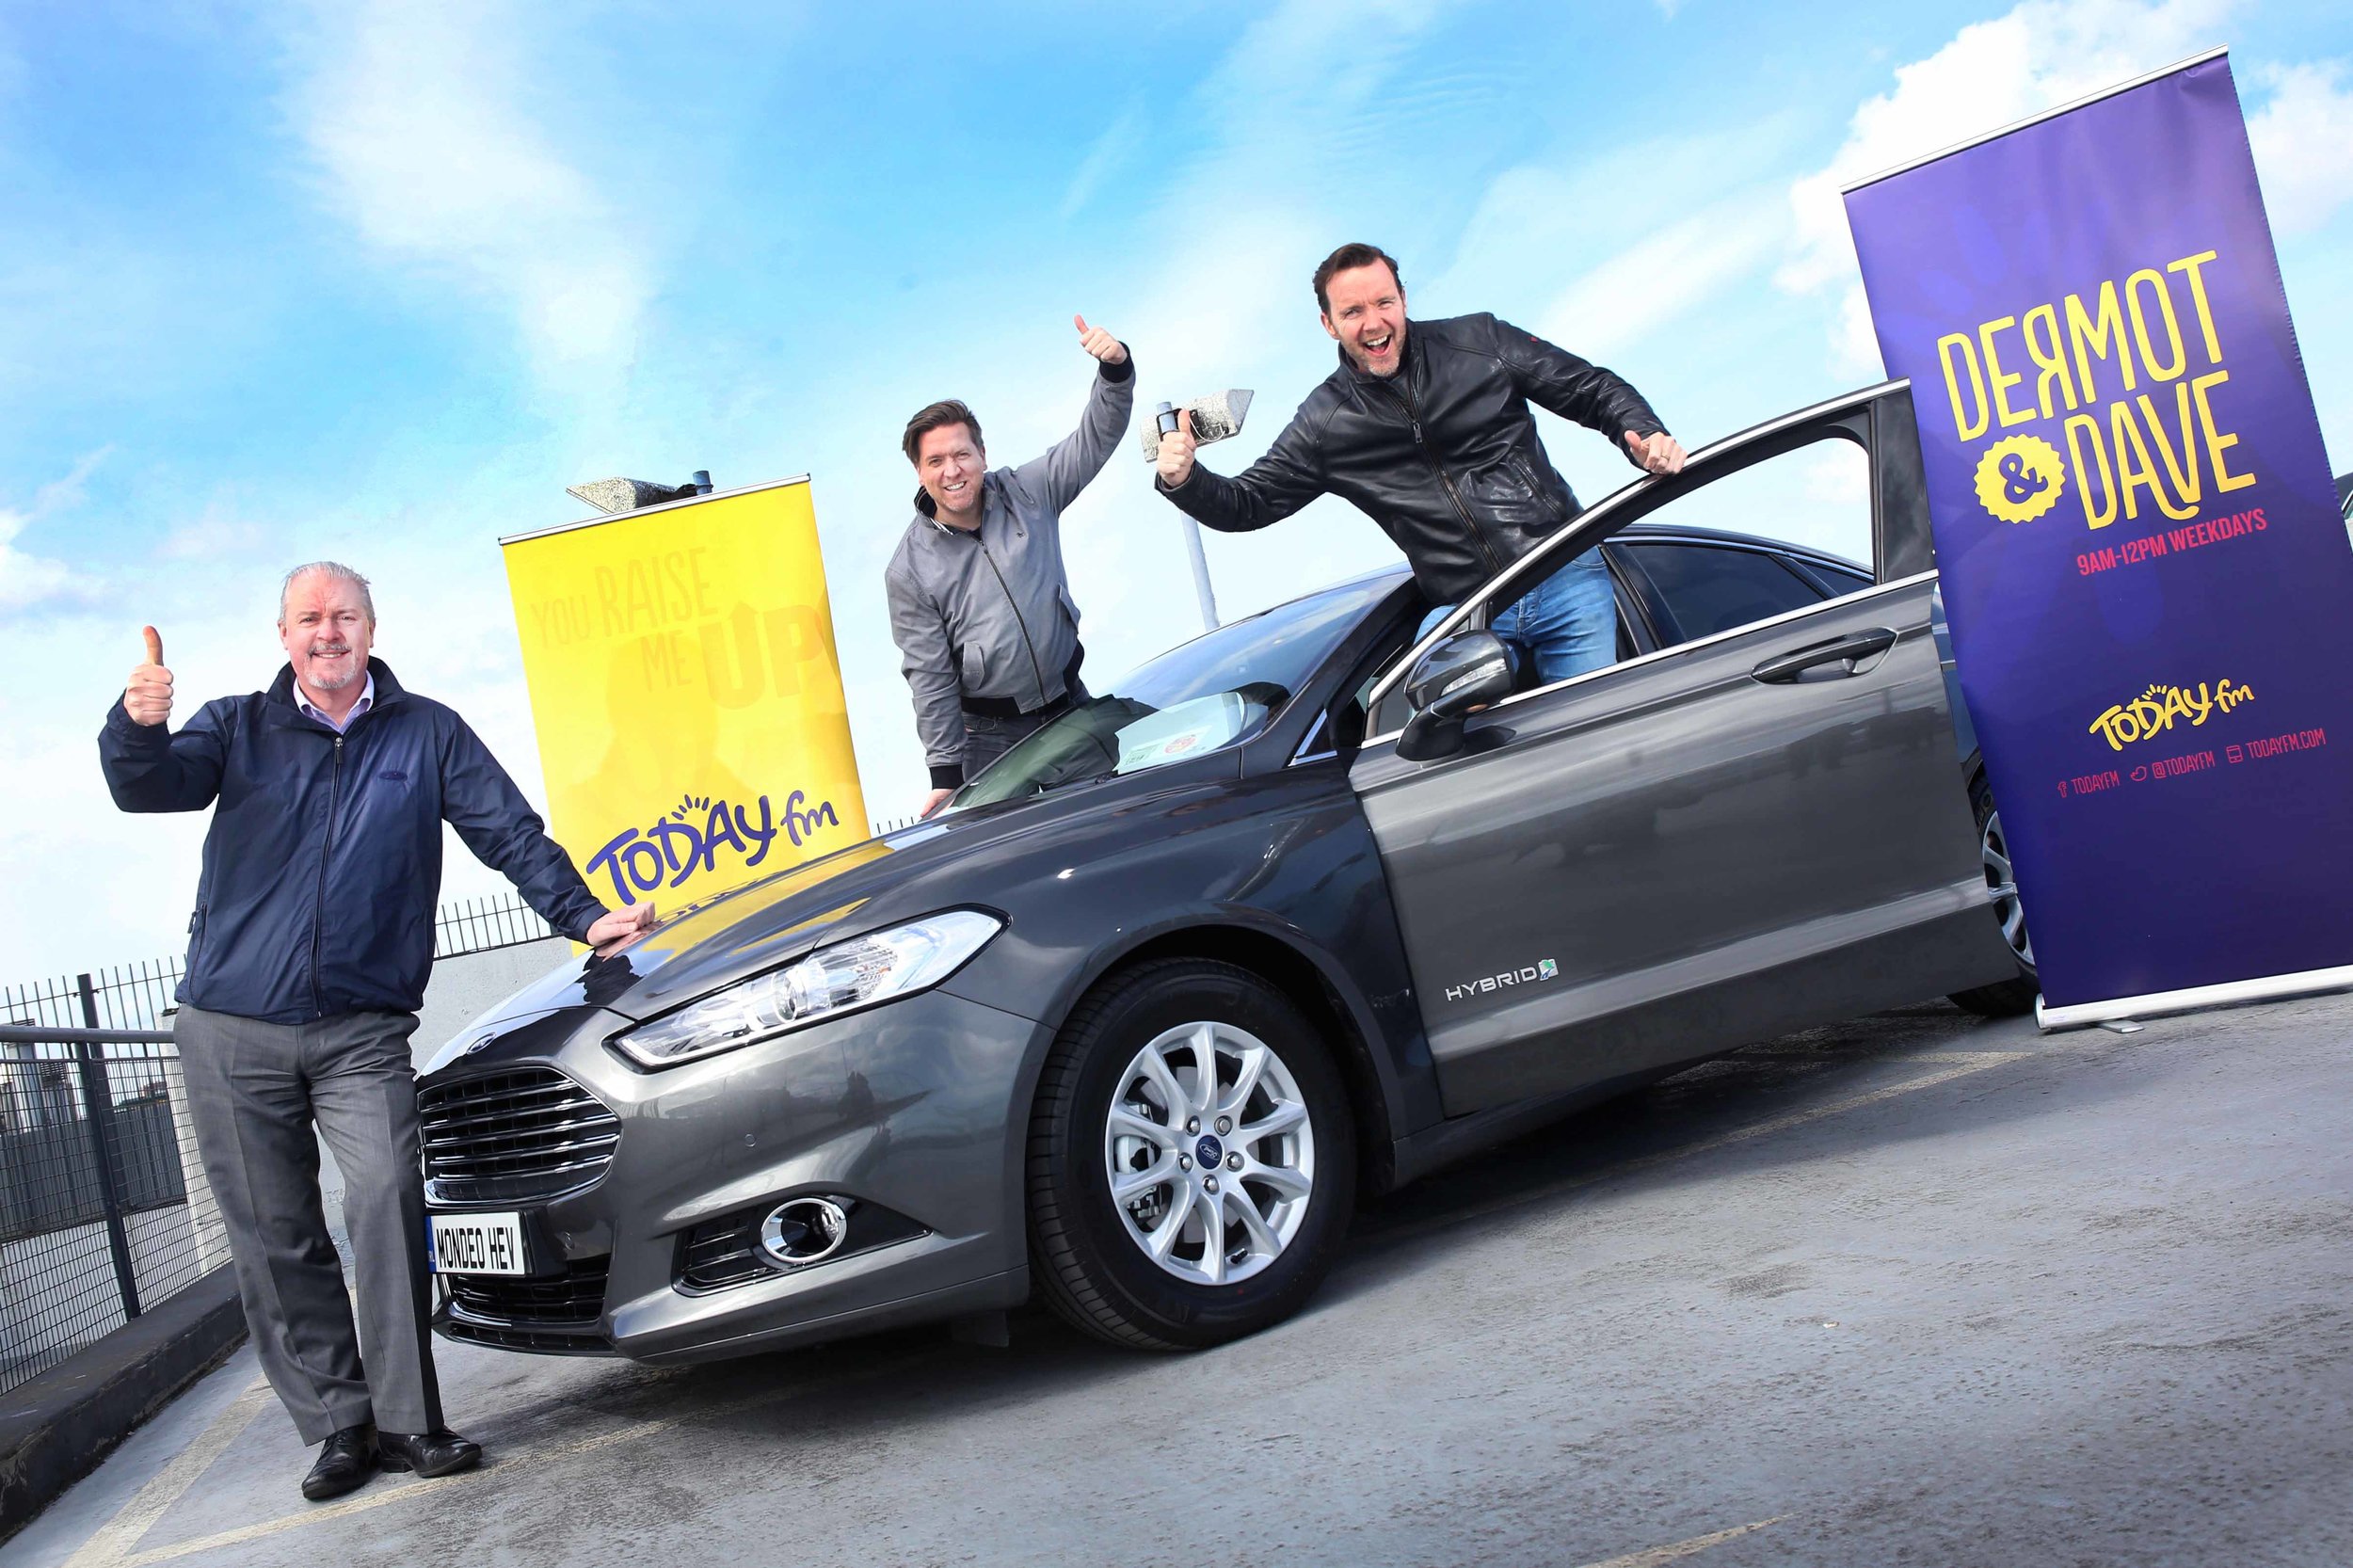  Ciarán McMahon, Chairman and Managing Director of Ford Ireland, announces Ford as title sponsor of the hugely popular Dermot &amp; Dave Show on Today FM. 